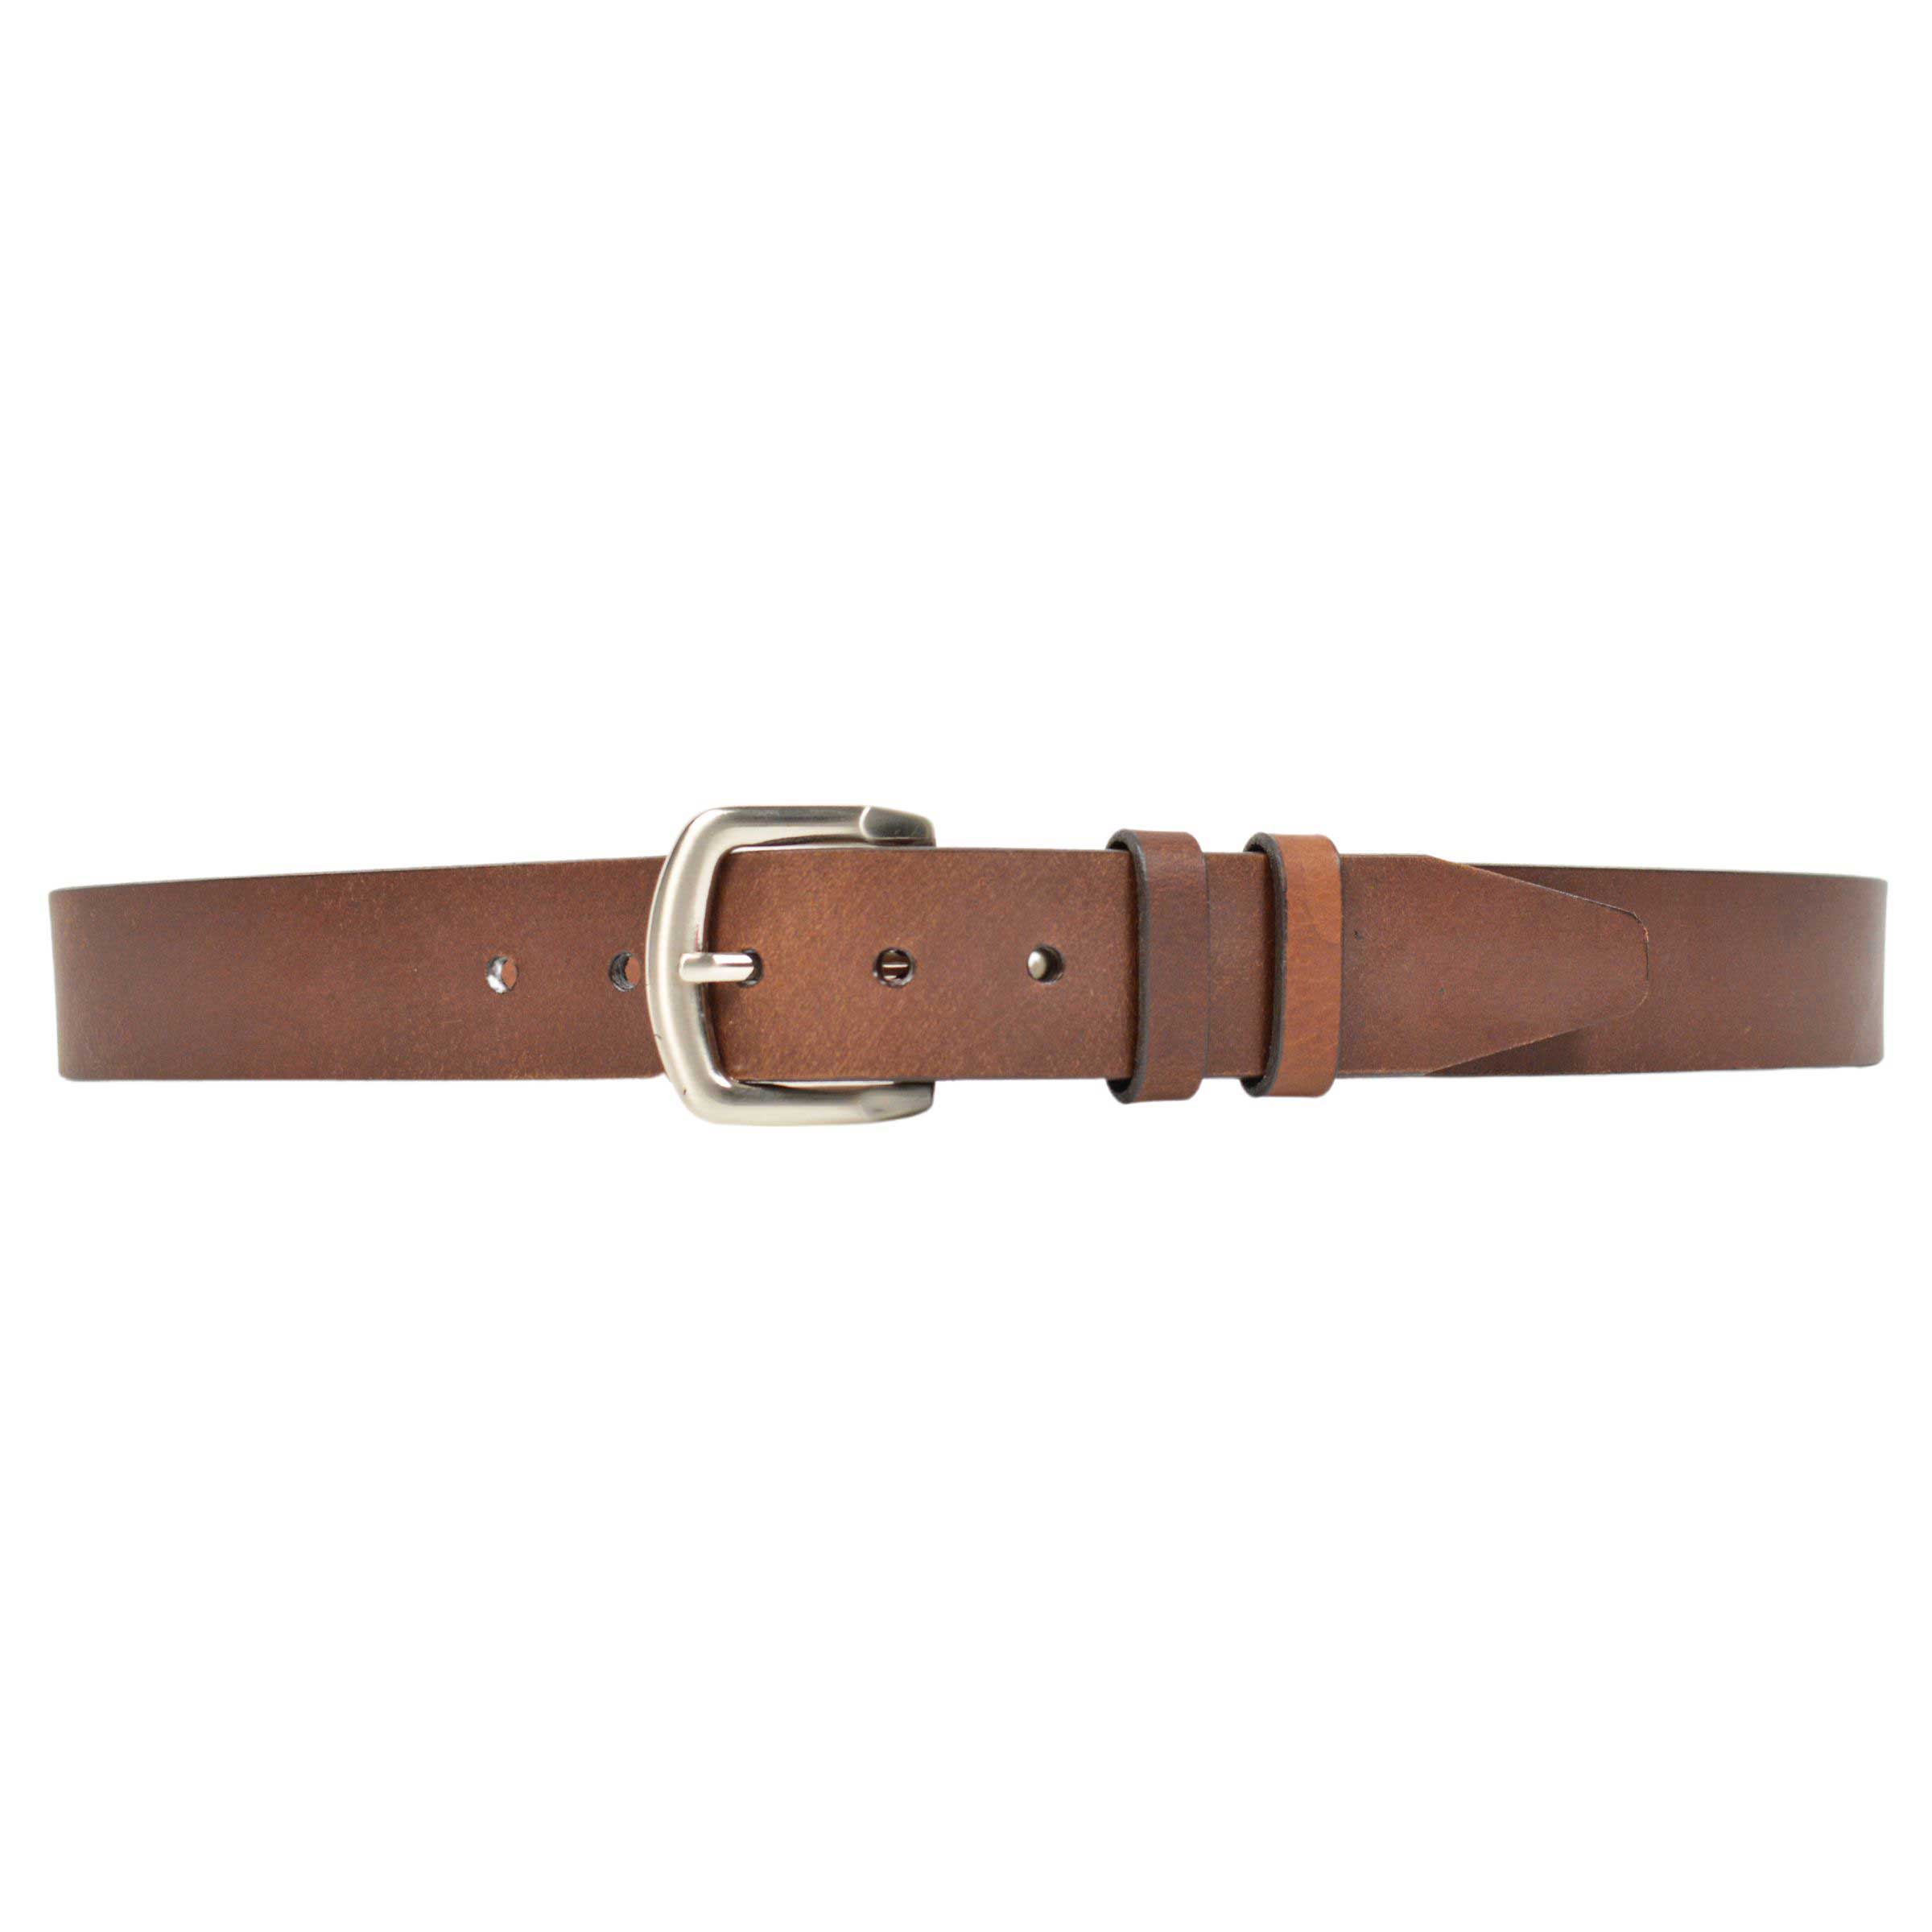 Brown oil tanned harness leather, flat hand painted black edge